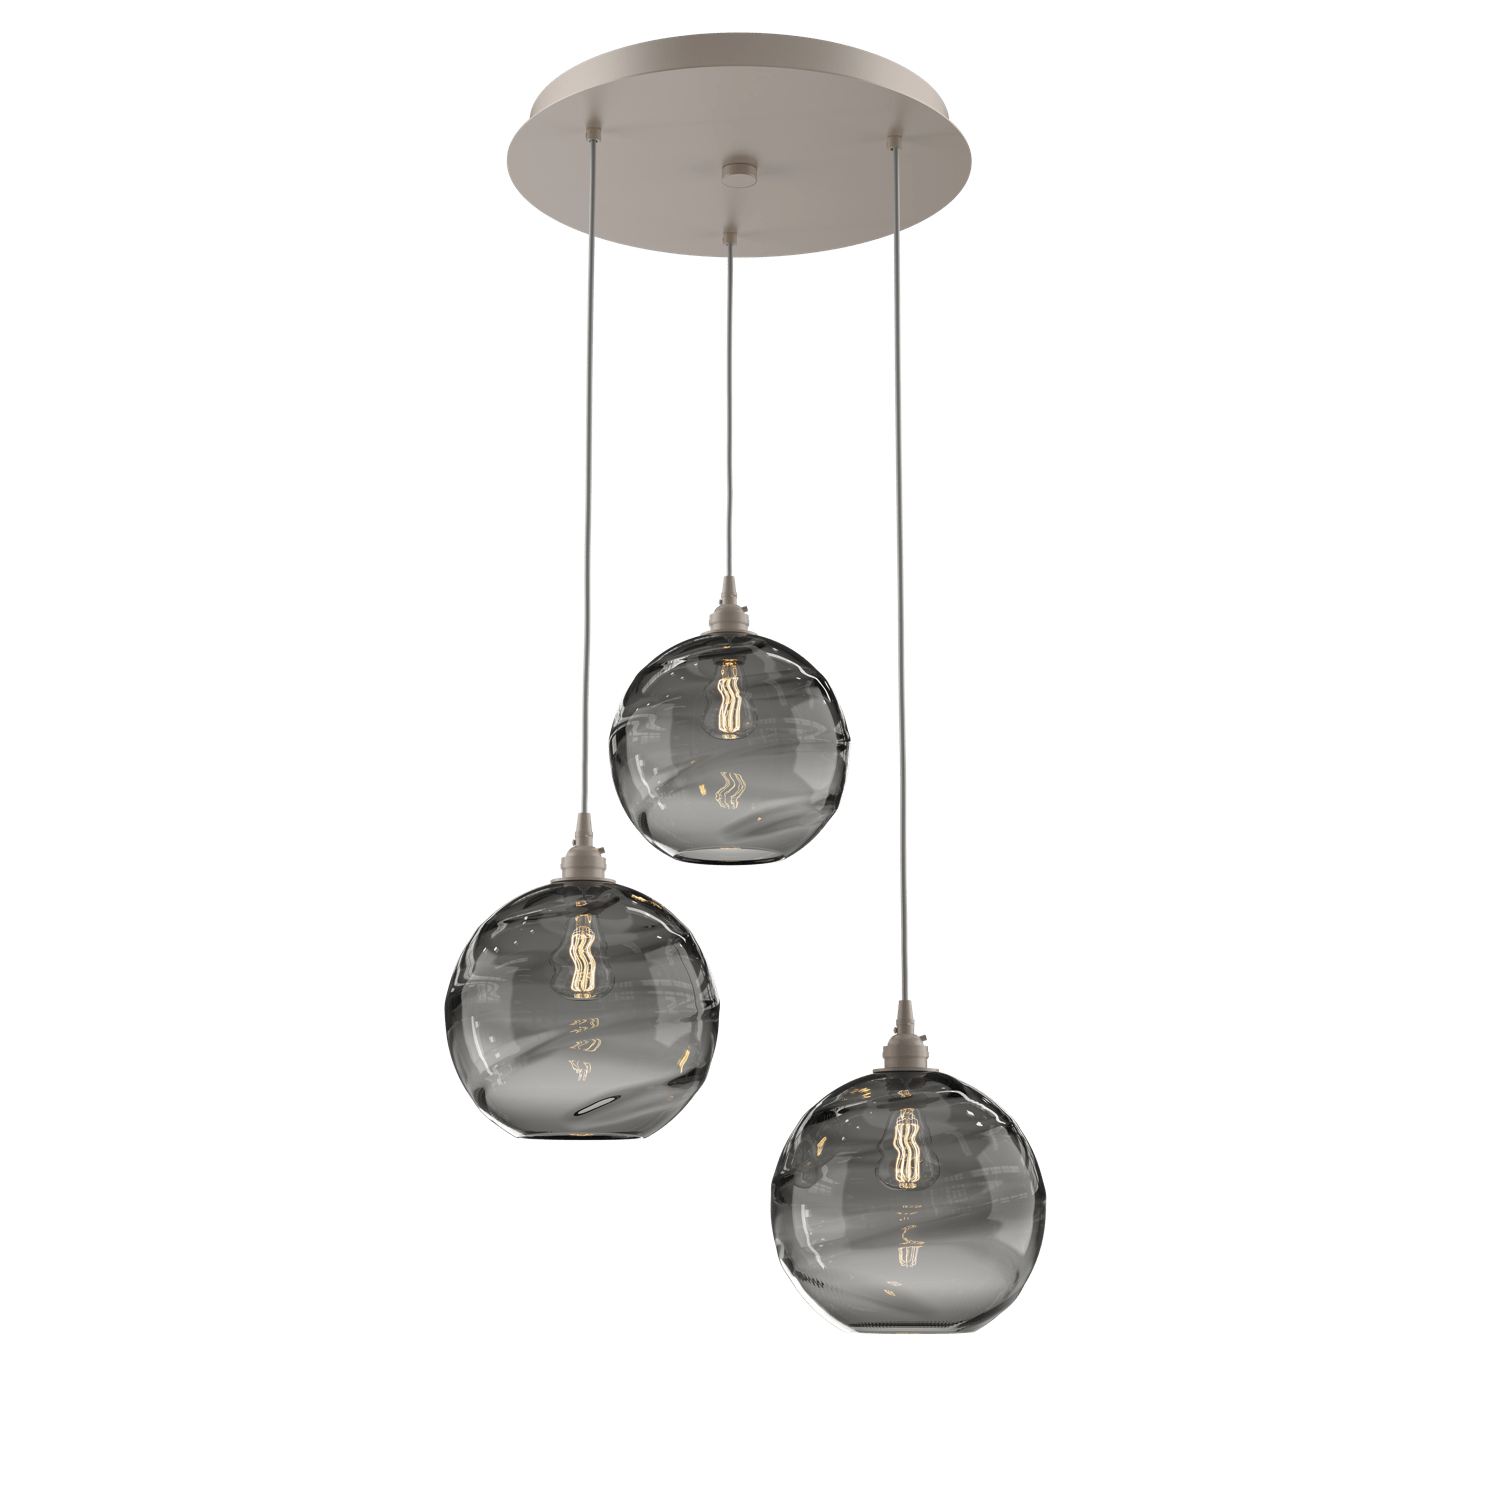 CHB0047-03-BS-OS-Hammerton-Studio-Optic-Blown-Glass-Terra-3-light-round-pendant-chandelier-with-metallic-beige-silver-finish-and-optic-smoke-blown-glass-shades-and-incandescent-lamping